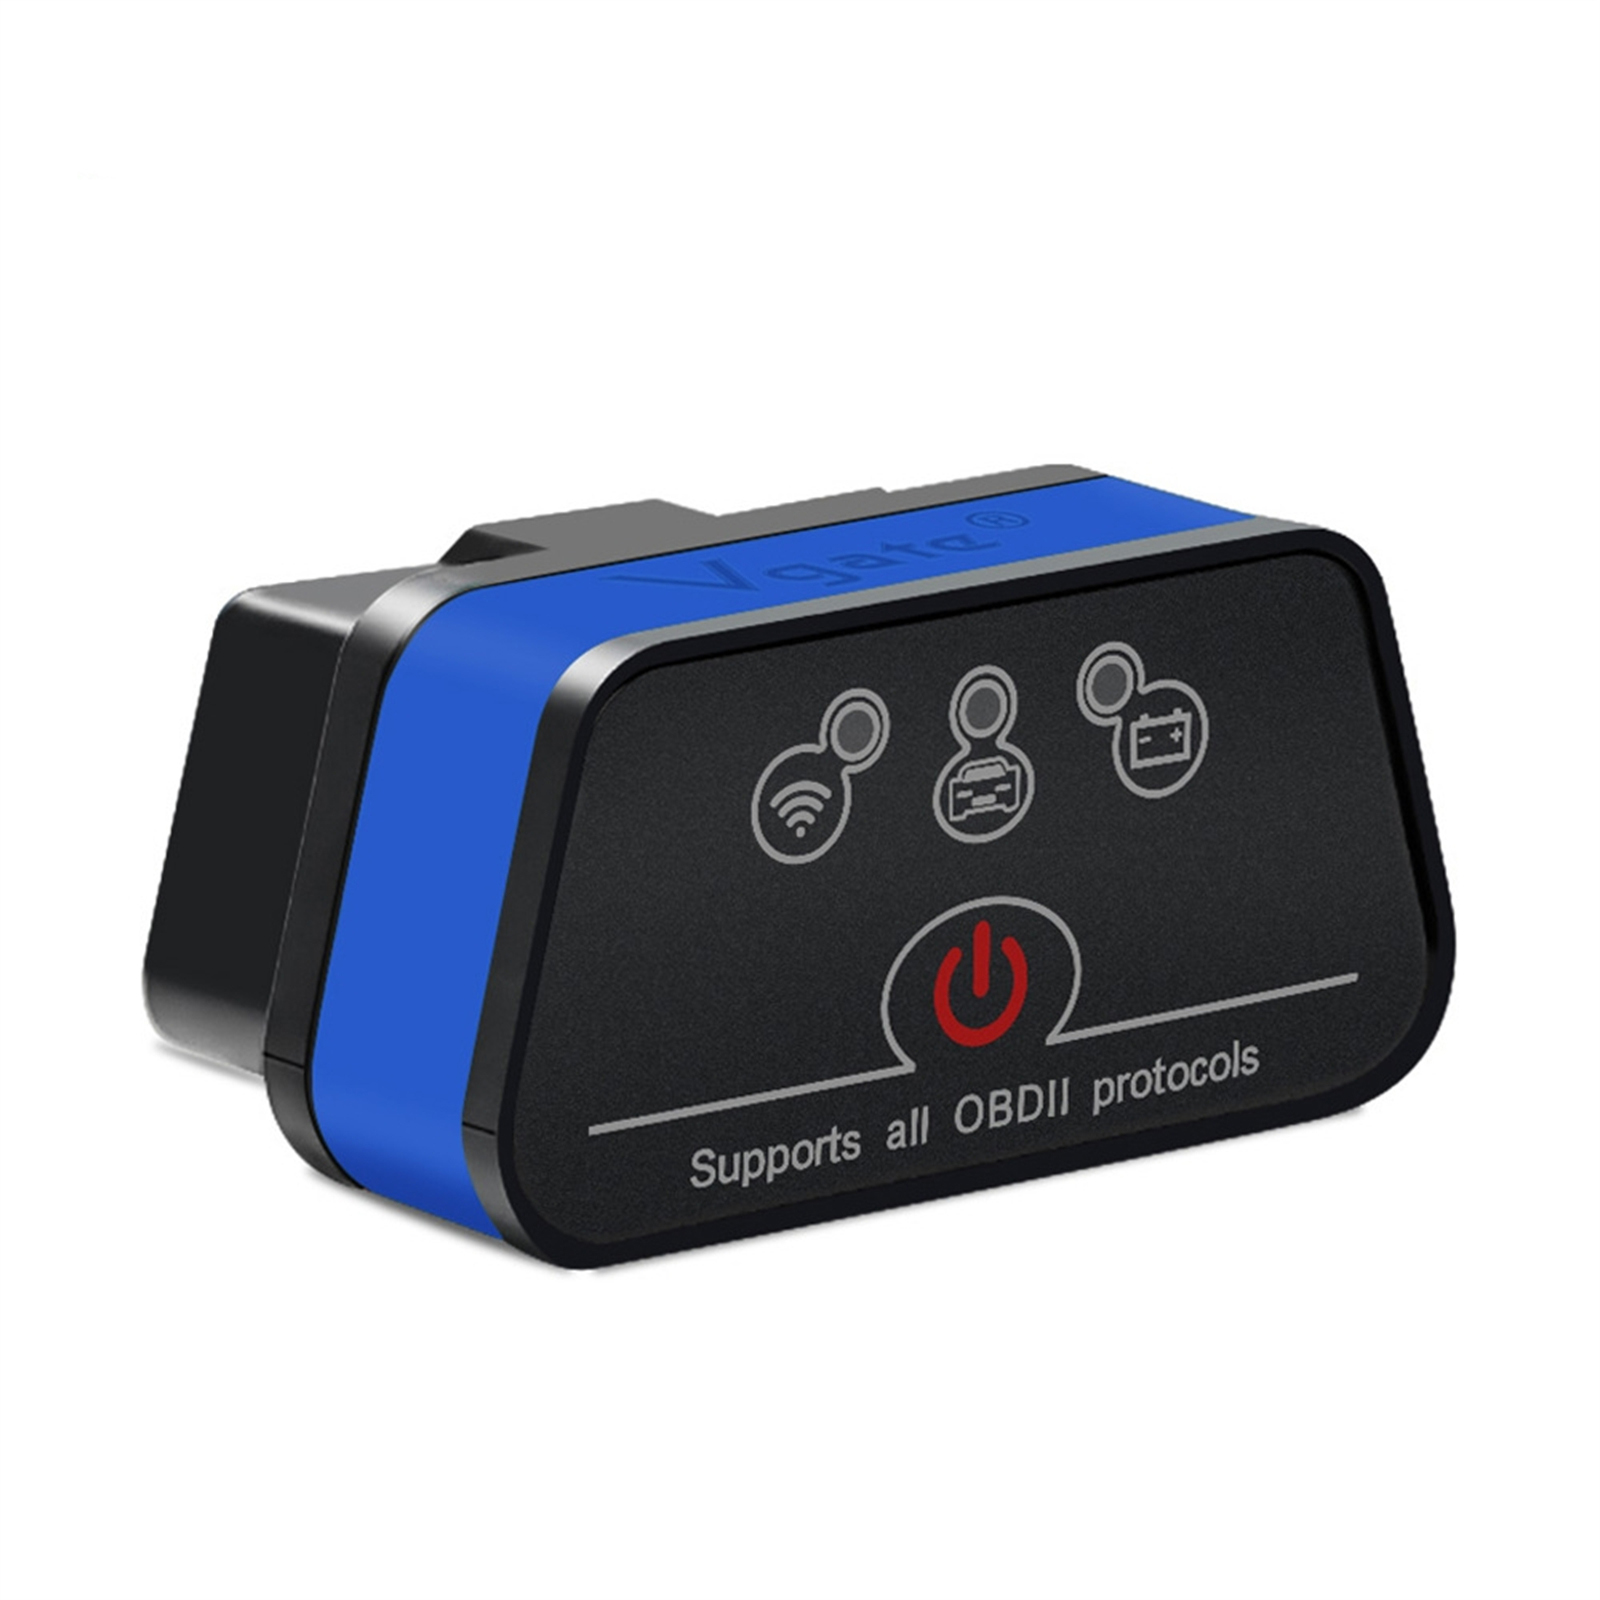 Vgate Icar 2 Wifi Version Obd2 Code Reader Icar2 Supports Obdii Protocols for Android IOS Windows